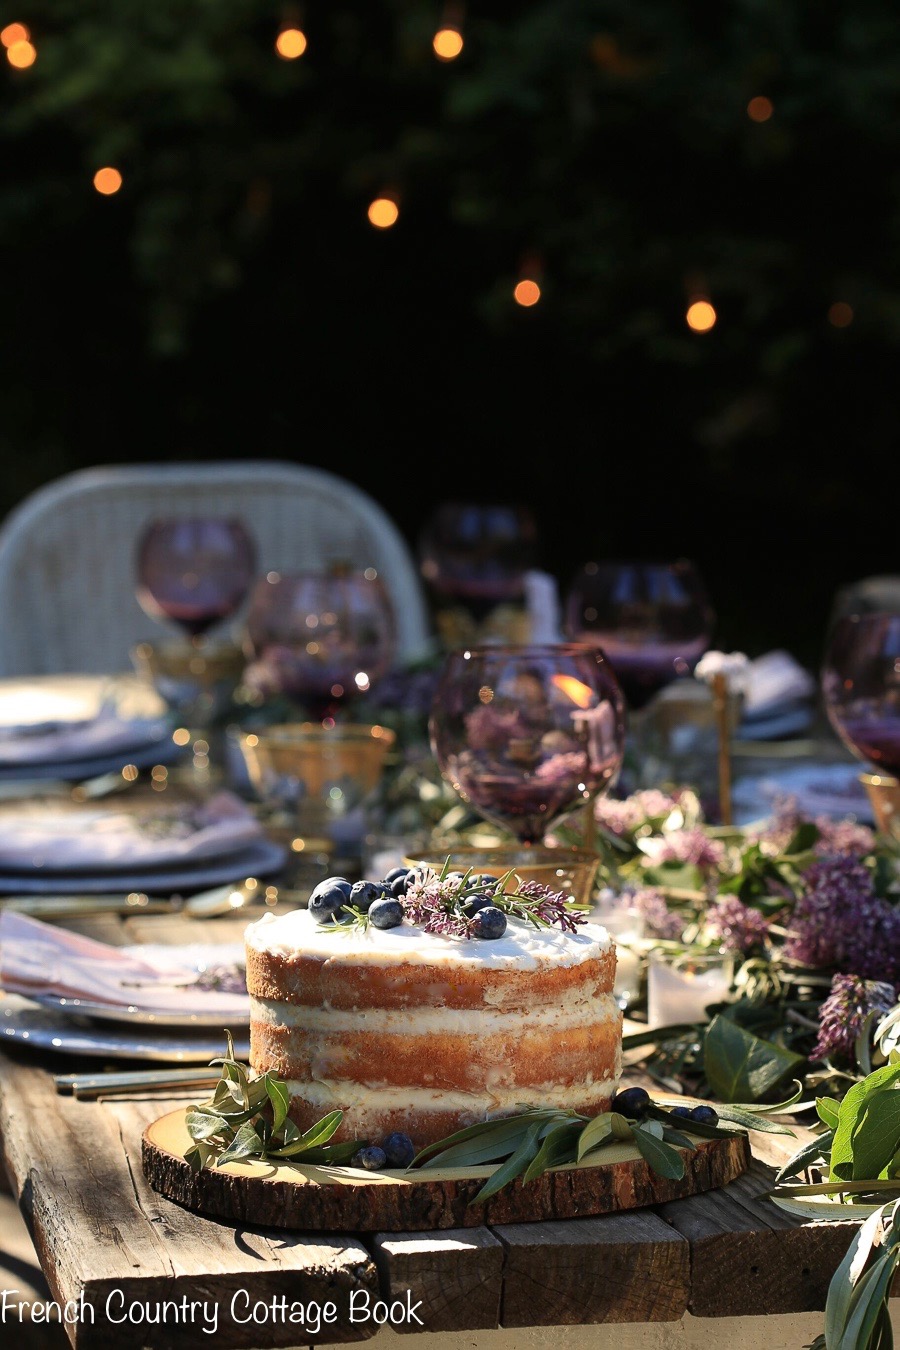 Lilac & olive branch inspired table & rustic cake